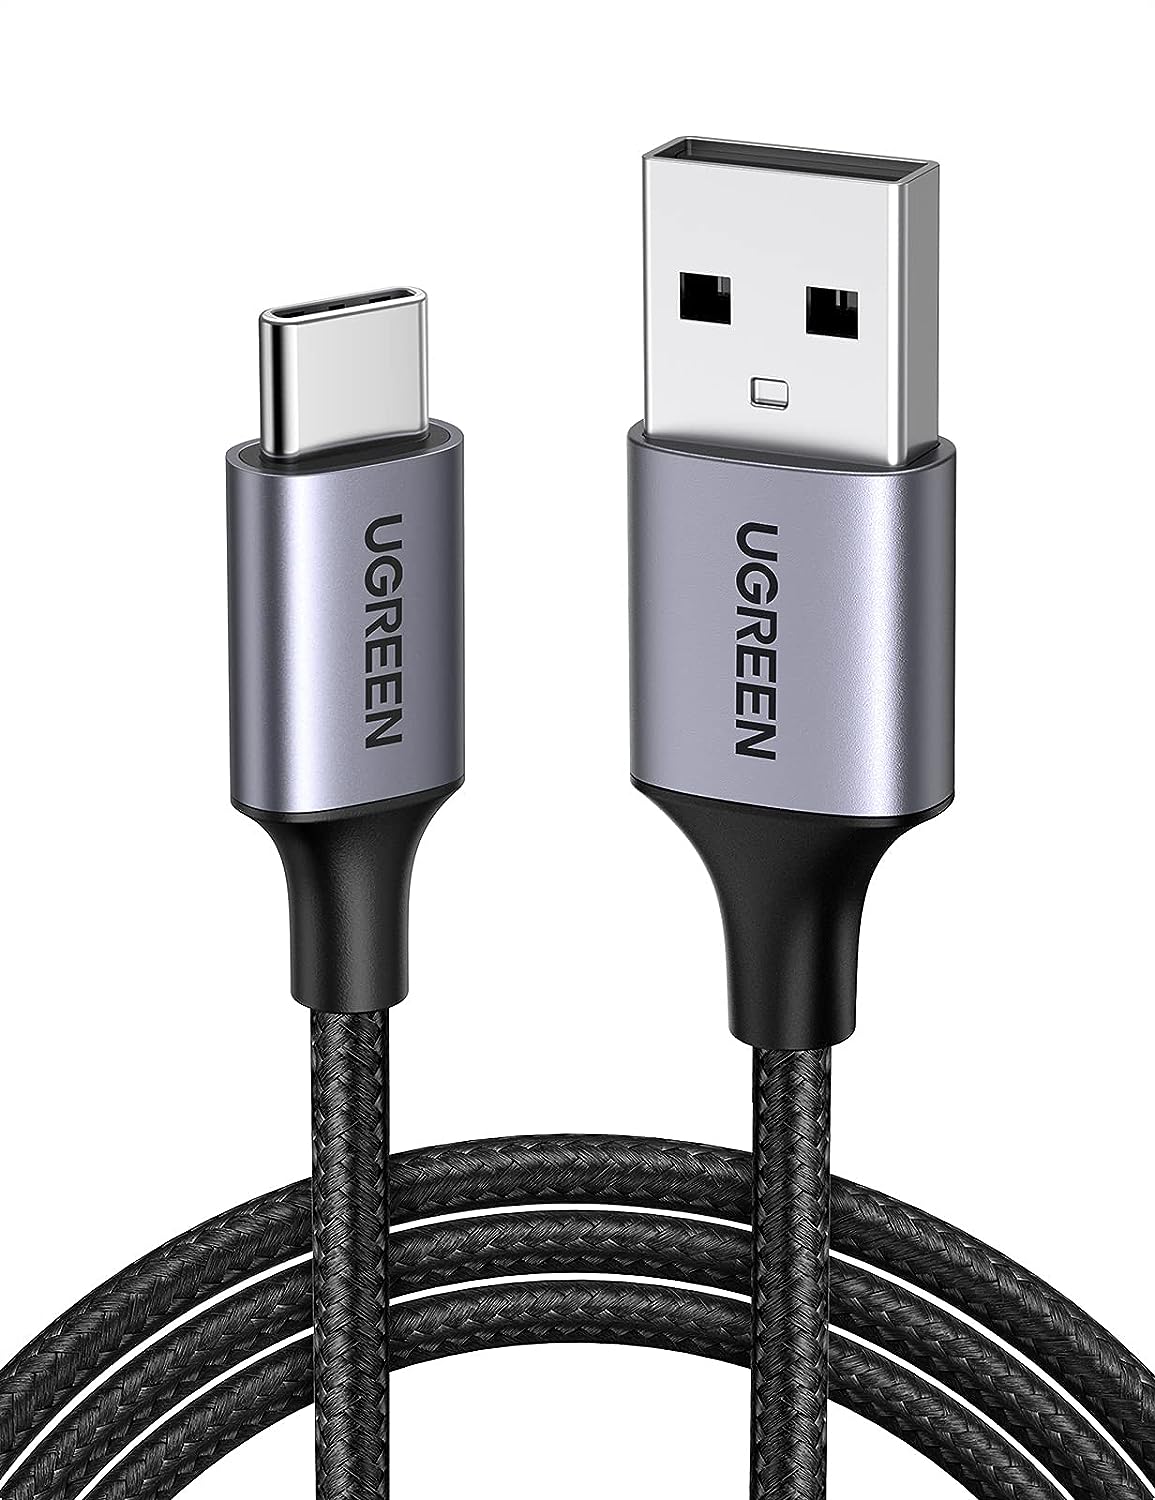 Ugreen Usb-A 2.0 To Usb-C Cable Nickel Plating Aluminum Braid For Charging Adapter Black 1mm